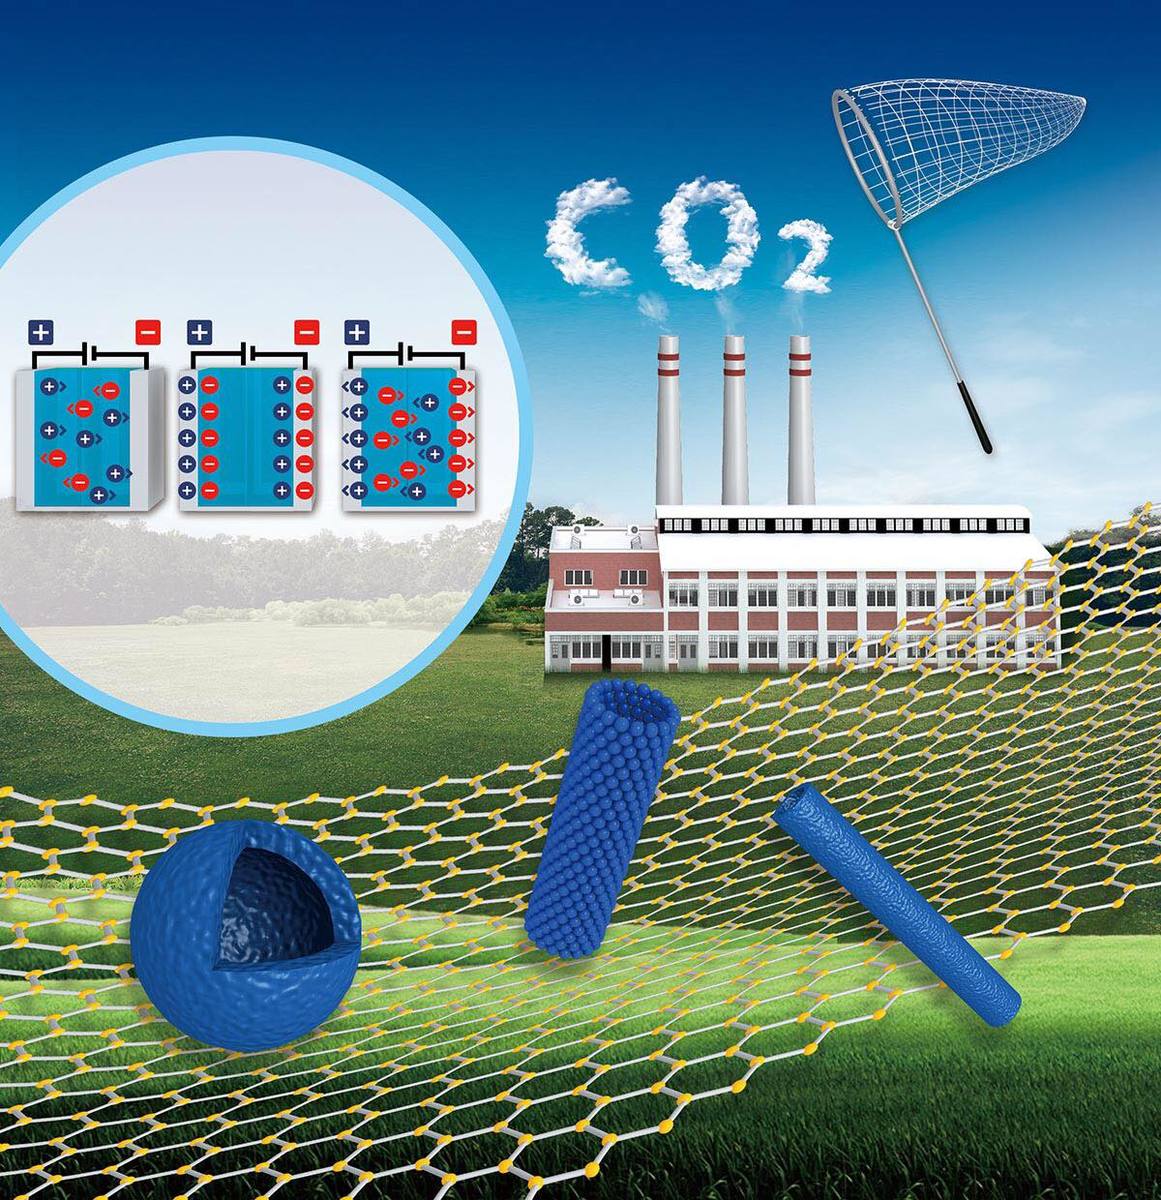 Successful fabrication of hollow microspherical and microtubular covalent organic frameworks (COFs) for superior carbon dioxide uptaking and high electrochemical energy storage./image provided by Assistant Professor Ahmed El-Mahdy